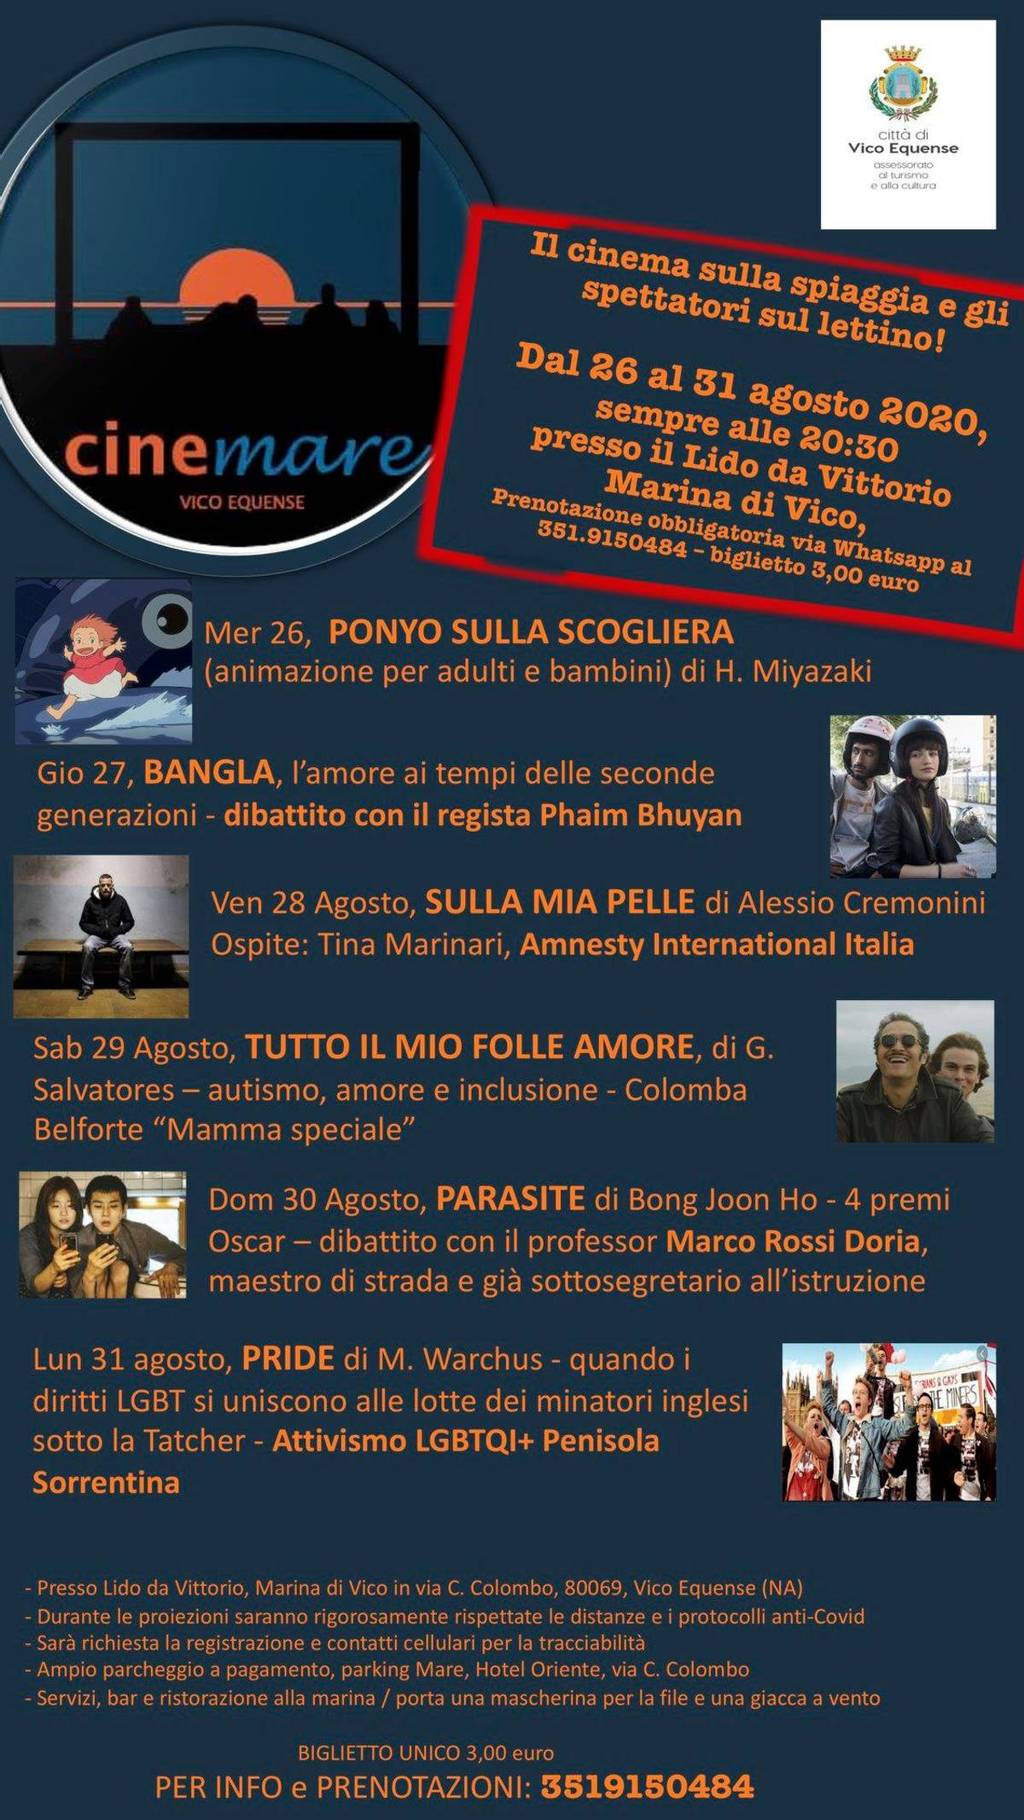 CineMare, the cinema by the sea